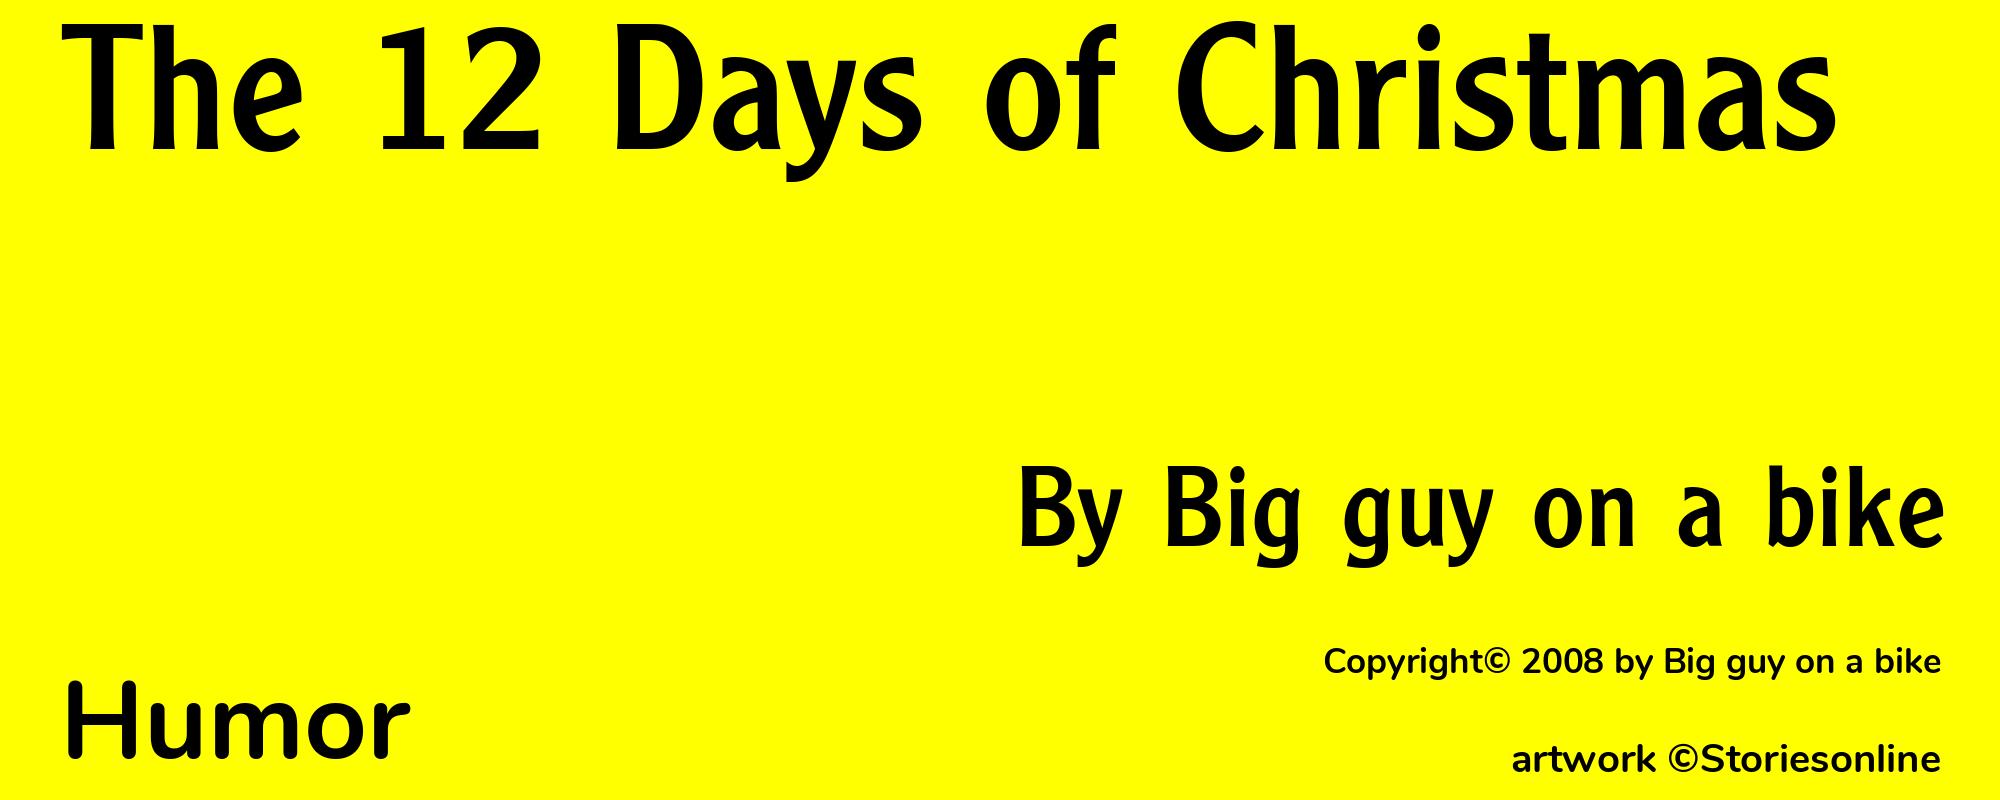 The 12 Days of Christmas - Cover